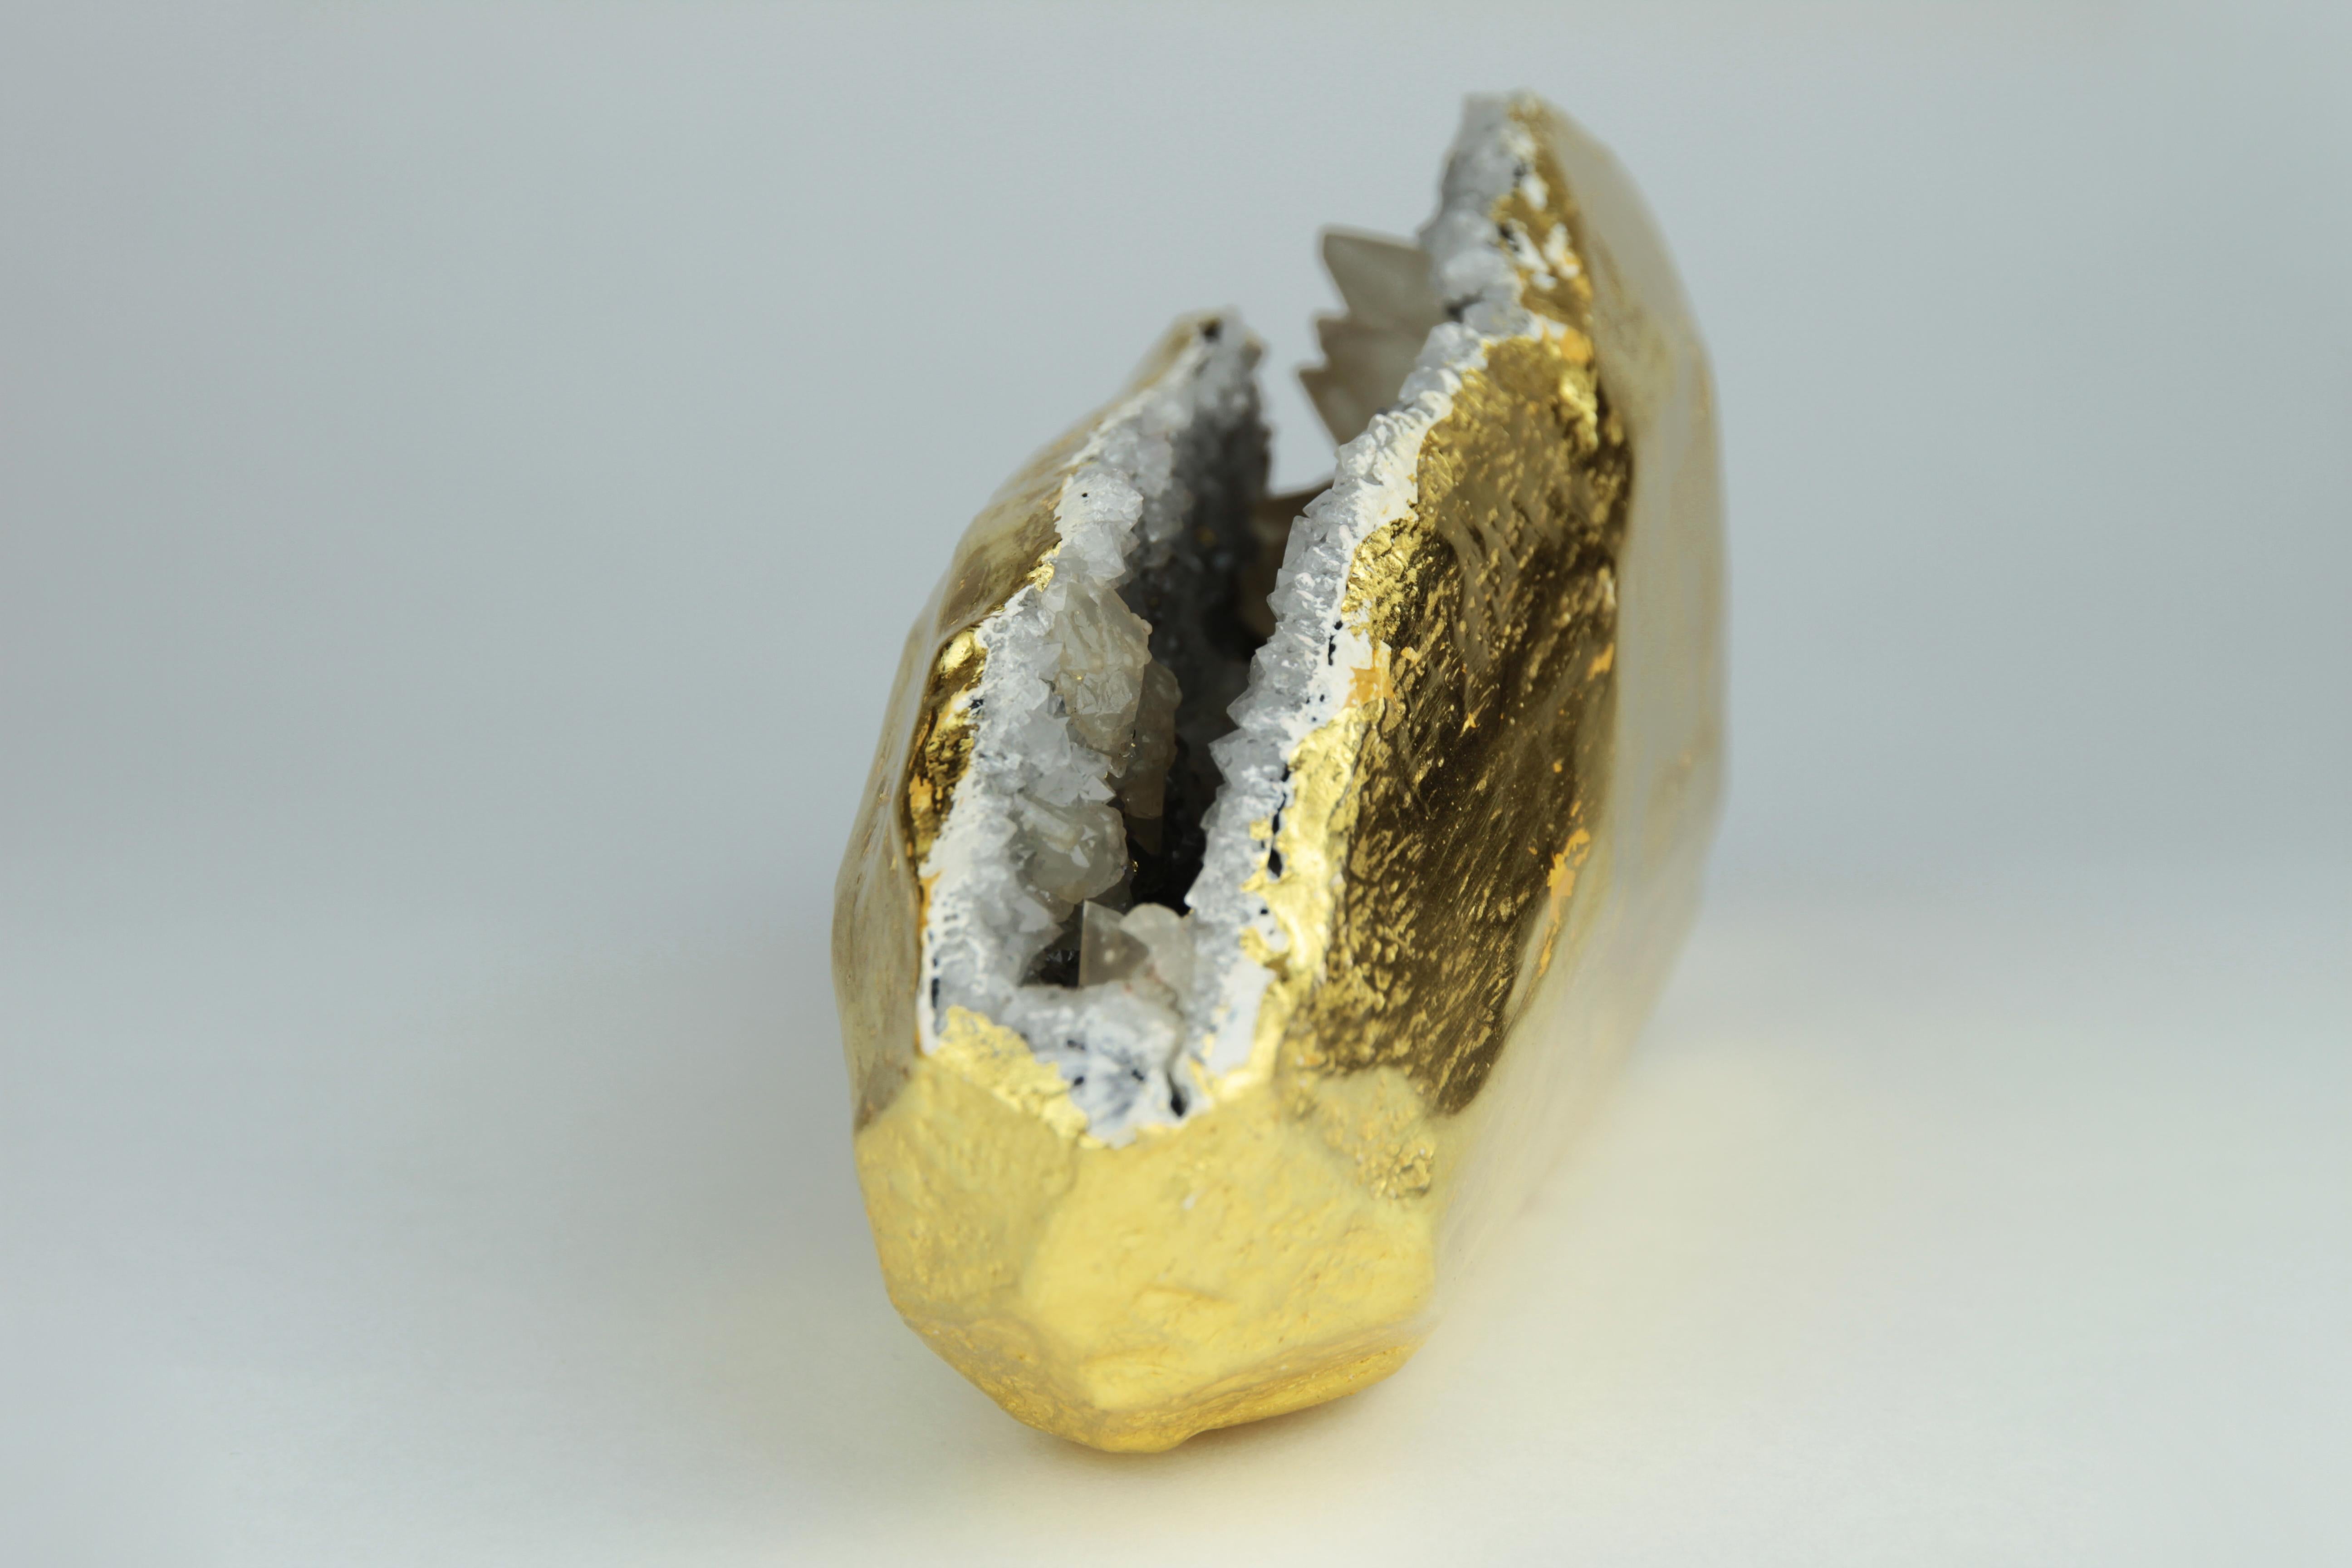 This unique crystal geode has been meticulously gilt in 22-karat gold leaf.
The one-of-a-kind natural sculpture will be a nice accent on a desk, coffee table, or anywhere it can be viewed from all sides.